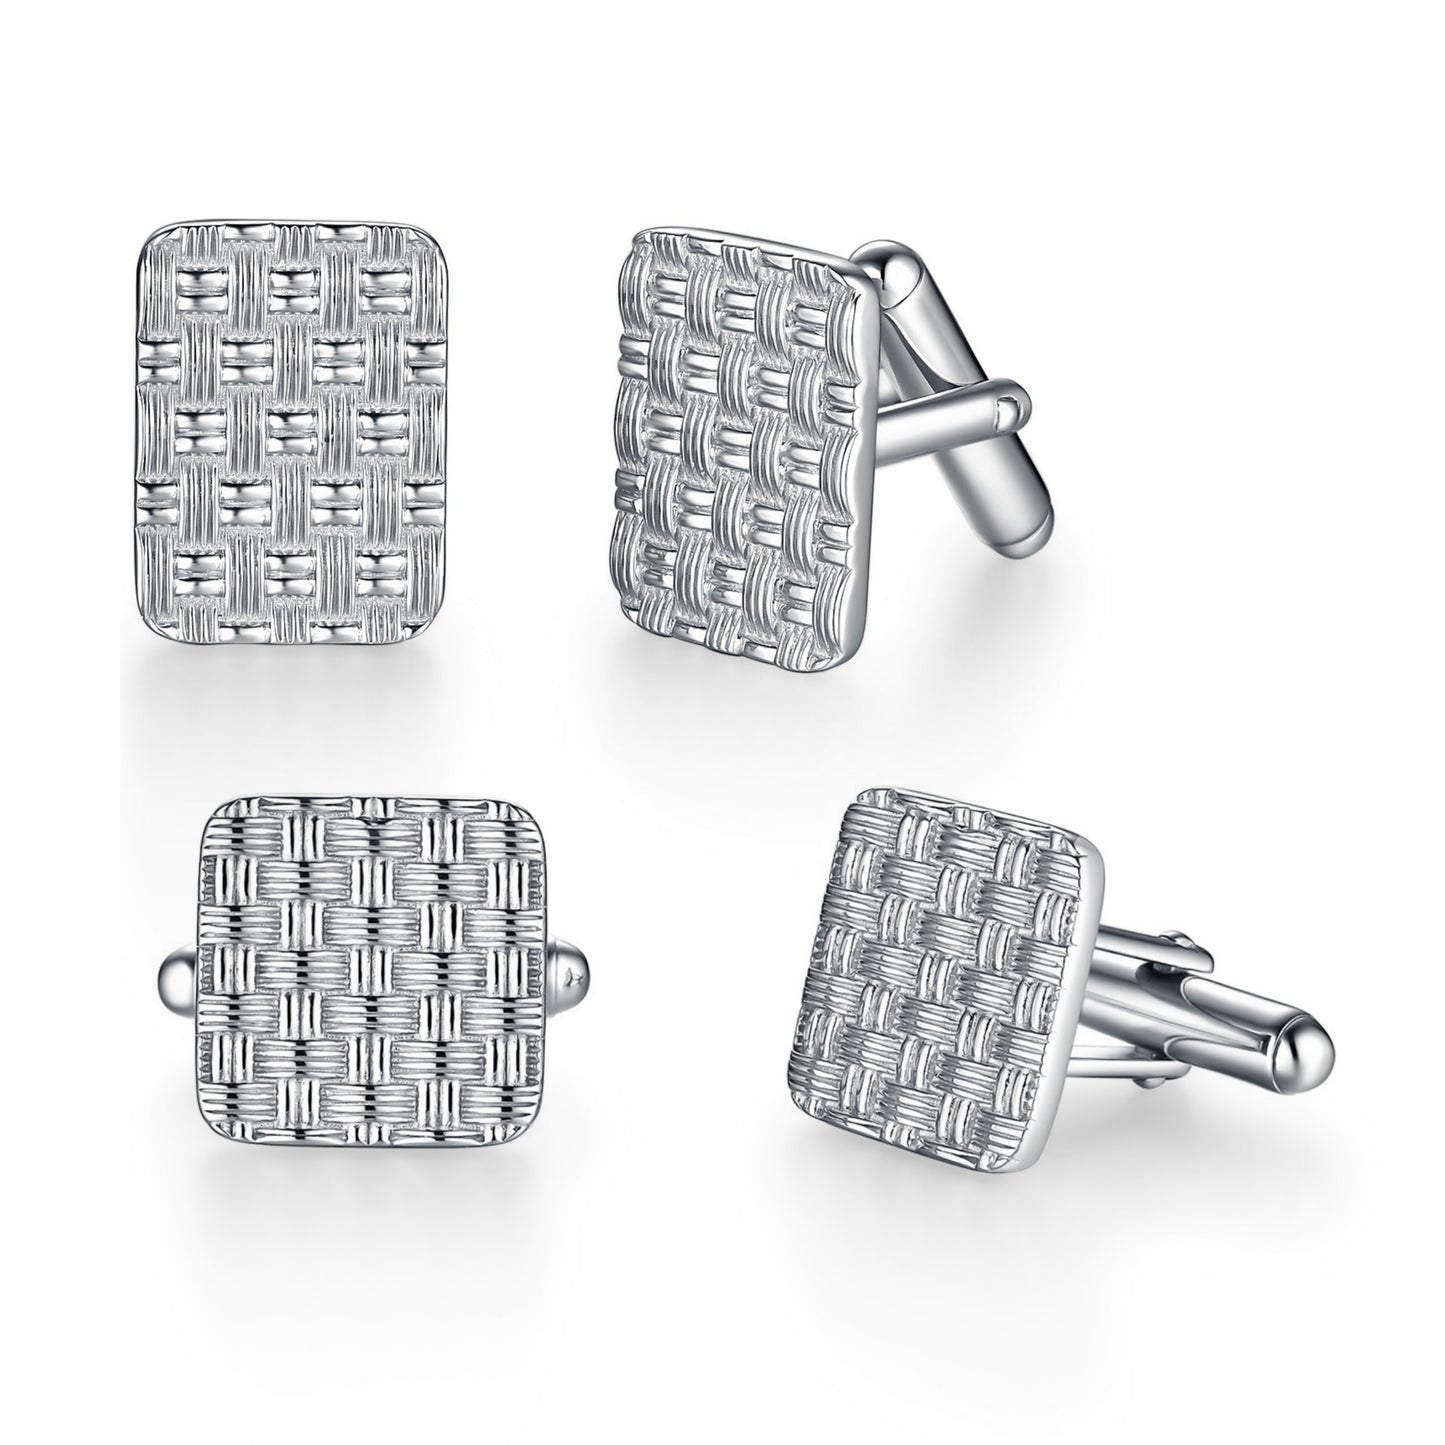 Rhodium Plated or Gold-plated Sterling Silver Weave Cufflinks